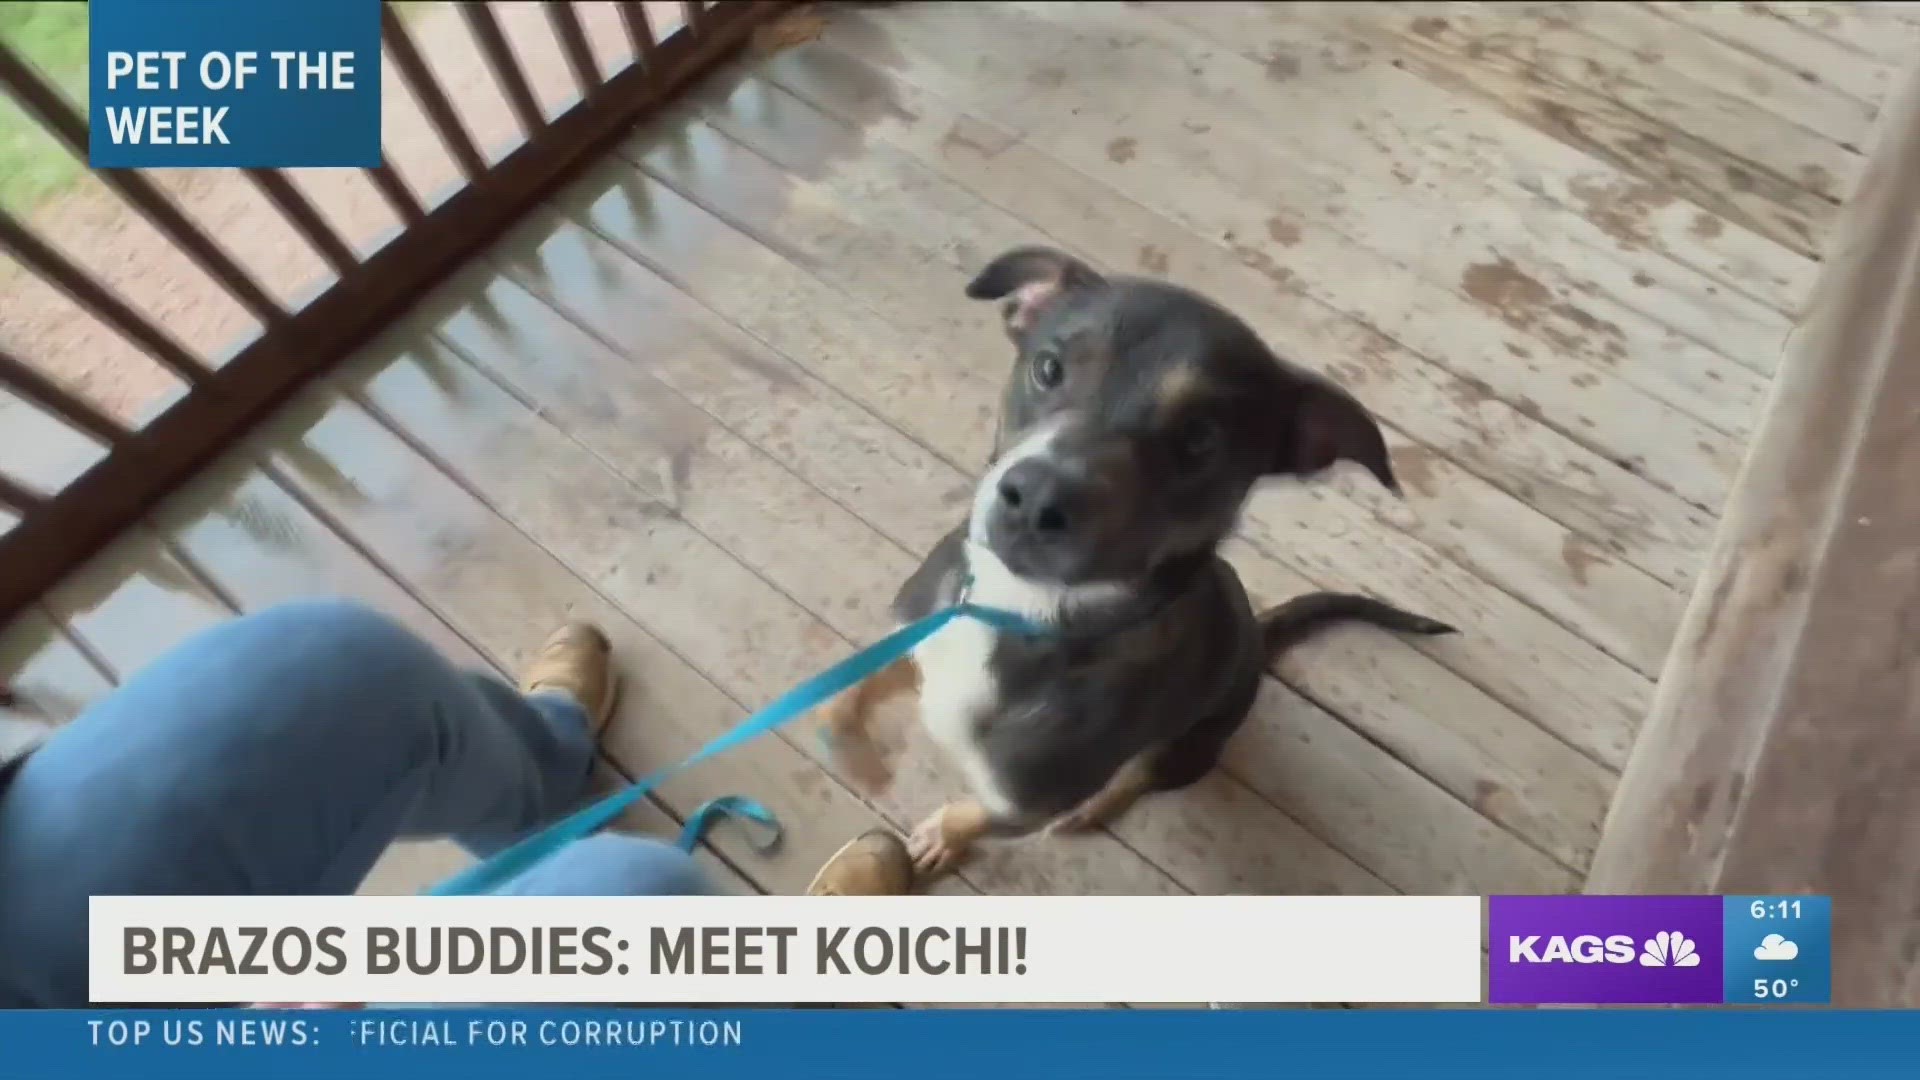 This week's featured Brazos Buddy is Koichi, a two-year-old Shepherd Hound mix that's looking to be adopted.